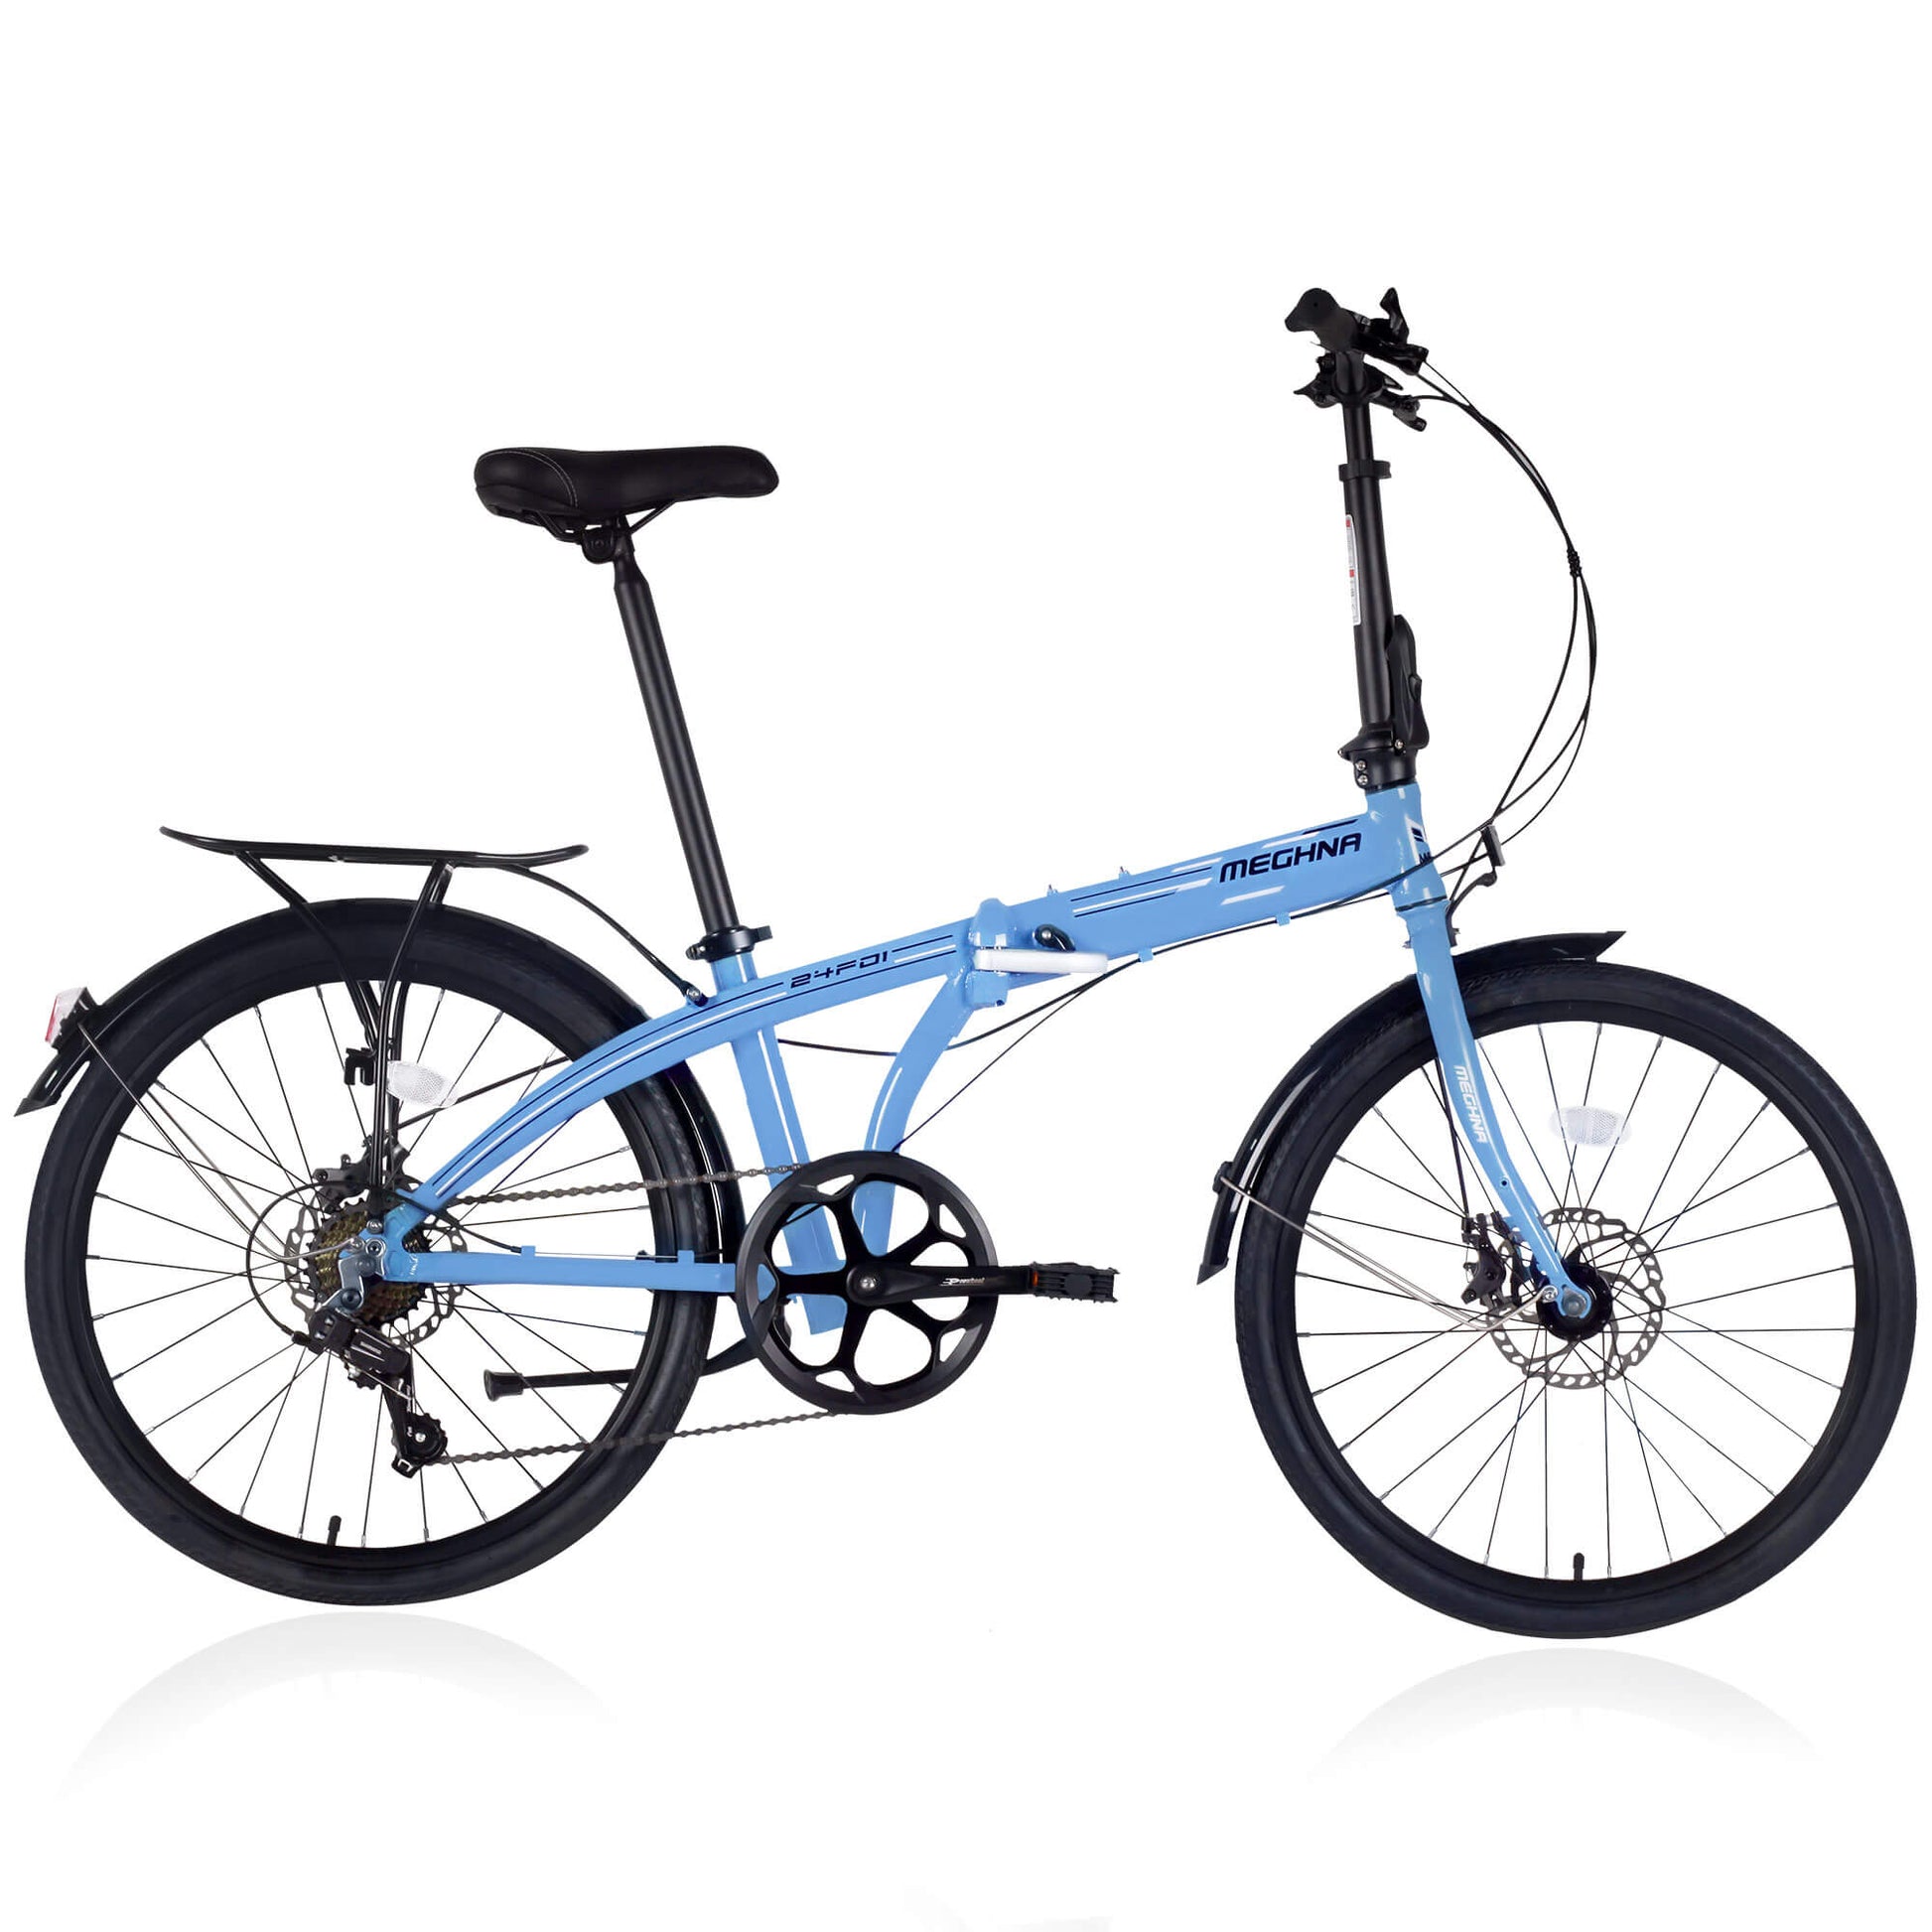 Hycline 20" / 24" / 26" bikes collection list